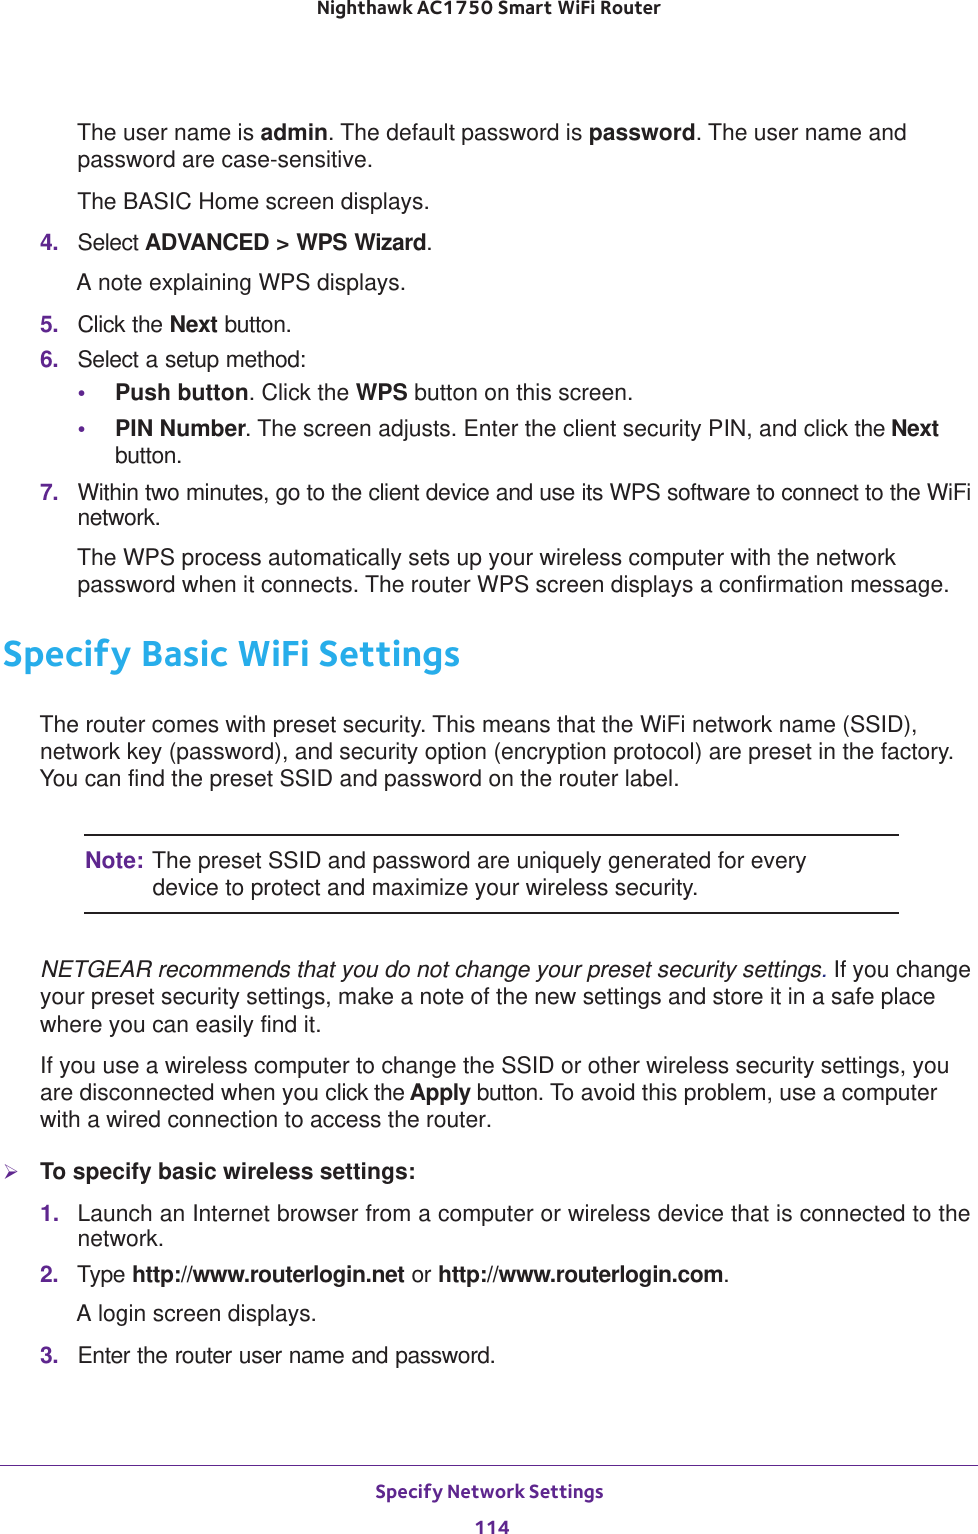 Specify Network Settings 114Nighthawk AC1750 Smart WiFi Router The user name is admin. The default password is password. The user name and password are case-sensitive.The BASIC Home screen displays.4.  Select ADVANCED &gt; WPS Wizard.A note explaining WPS displays.5.  Click the Next button. 6.  Select a setup method:•Push button. Click the WPS button on this screen. •PIN Number. The screen adjusts. Enter the client security PIN, and click the Next button.7.  Within two minutes, go to the client device and use its WPS software to connect to the WiFi network.The WPS process automatically sets up your wireless computer with the network password when it connects. The router WPS screen displays a confirmation message. Specify Basic WiFi SettingsThe router comes with preset security. This means that the WiFi network name (SSID), network key (password), and security option (encryption protocol) are preset in the factory. You can find the preset SSID and password on the router label. Note: The preset SSID and password are uniquely generated for every device to protect and maximize your wireless security.NETGEAR recommends that you do not change your preset security settings. If you change your preset security settings, make a note of the new settings and store it in a safe place where you can easily find it.If you use a wireless computer to change the SSID or other wireless security settings, you are disconnected when you click the Apply button. To avoid this problem, use a computer with a wired connection to access the router.To specify basic wireless settings:1.  Launch an Internet browser from a computer or wireless device that is connected to the network.2.  Type http://www.routerlogin.net or http://www.routerlogin.com.A login screen displays.3.  Enter the router user name and password.